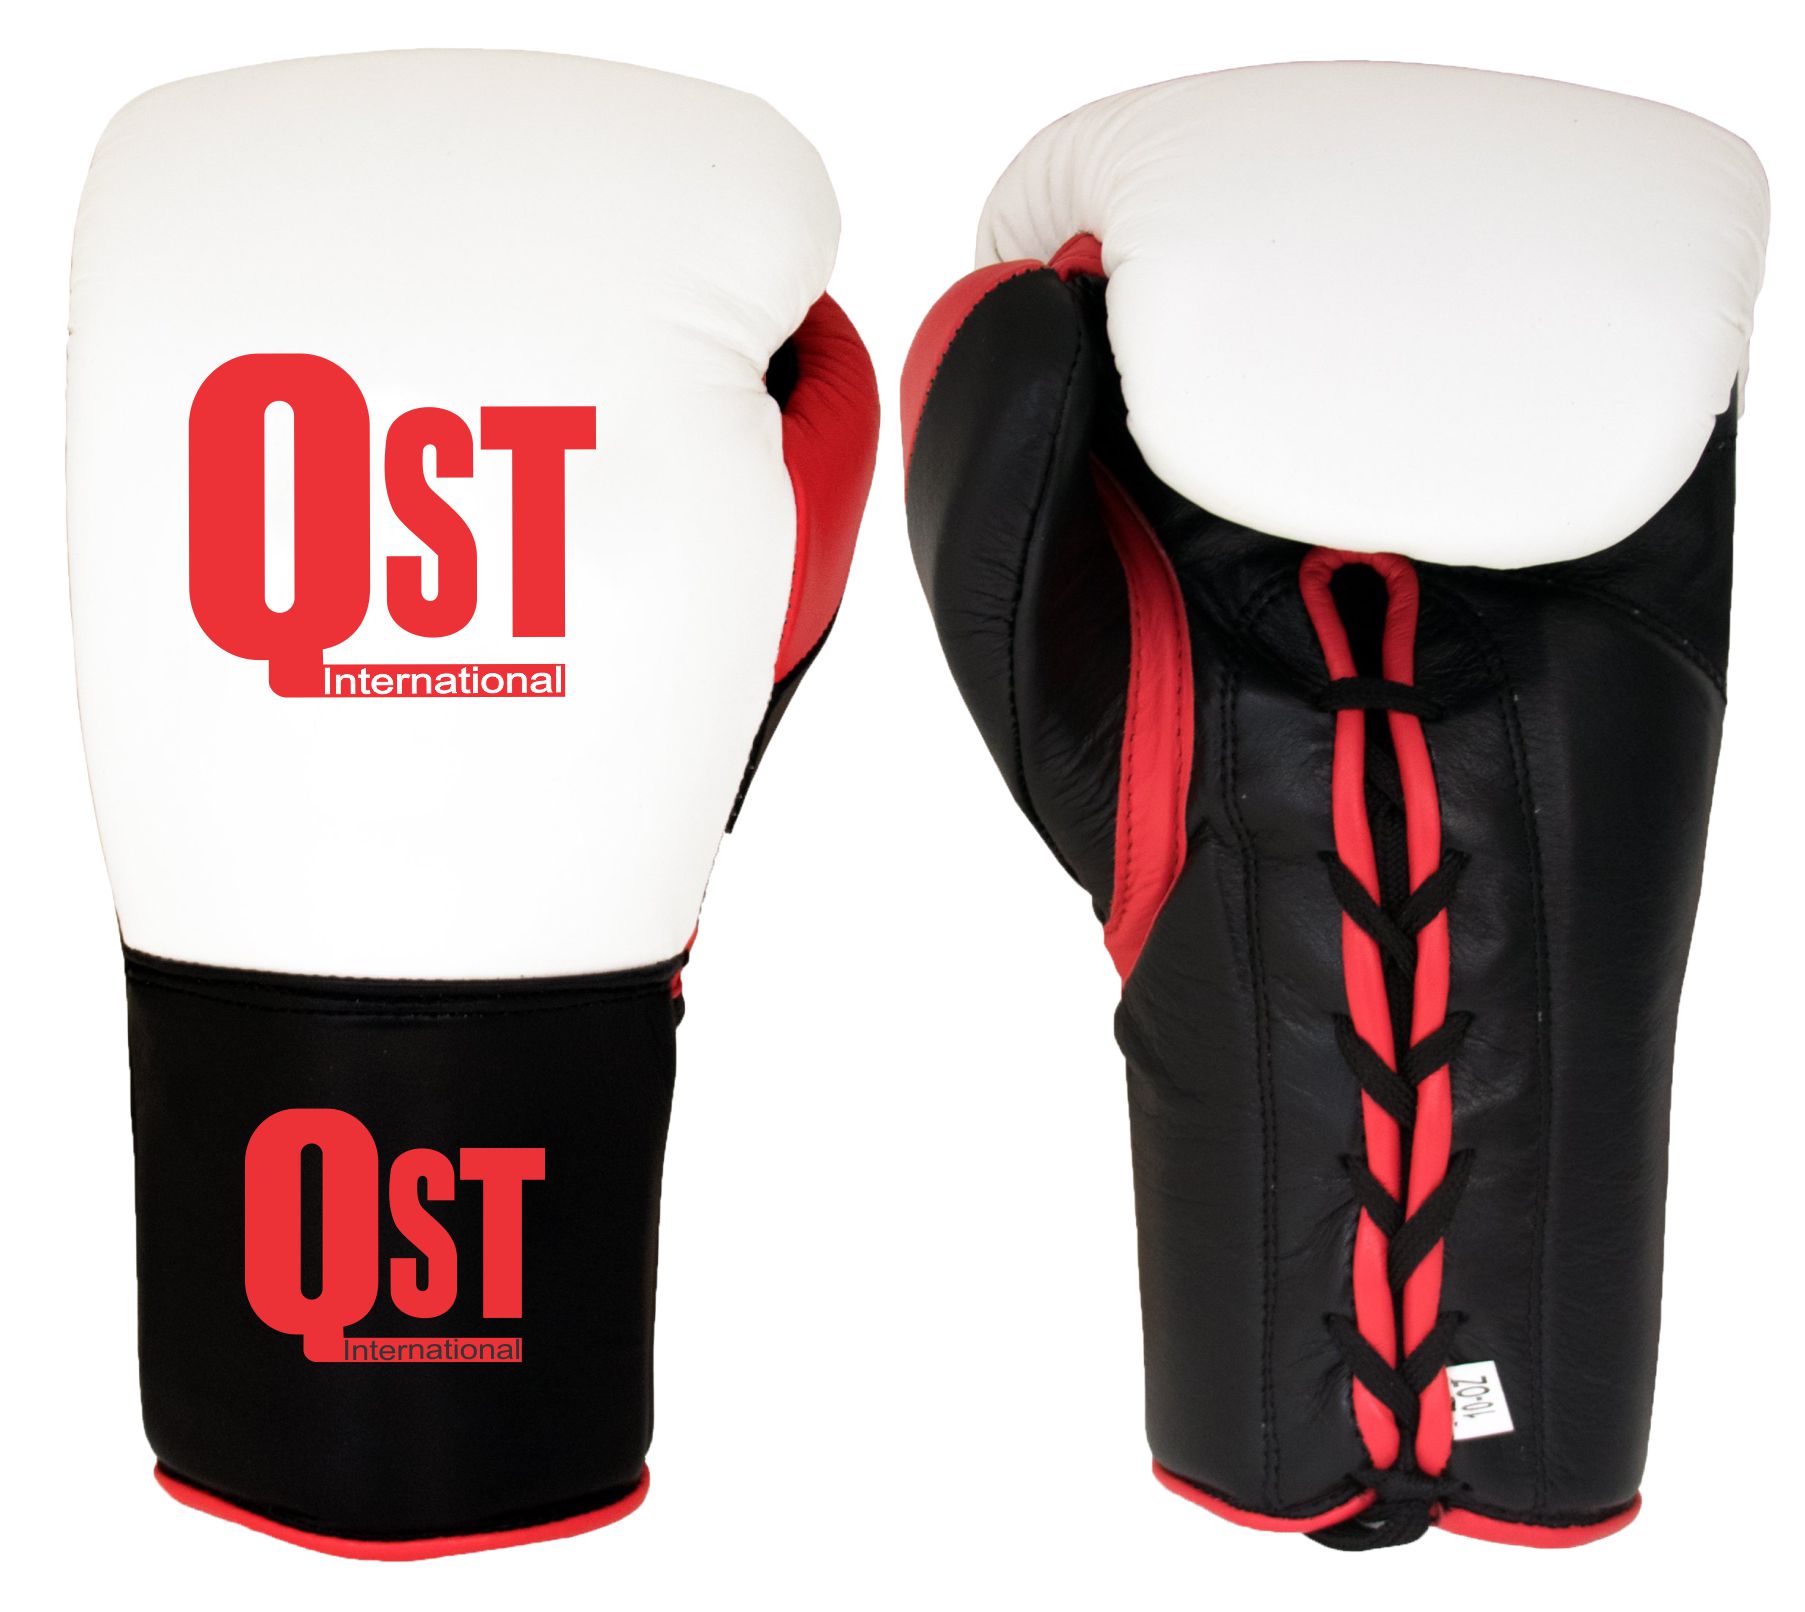 Lace up Boxing Gloves - PRG-3259